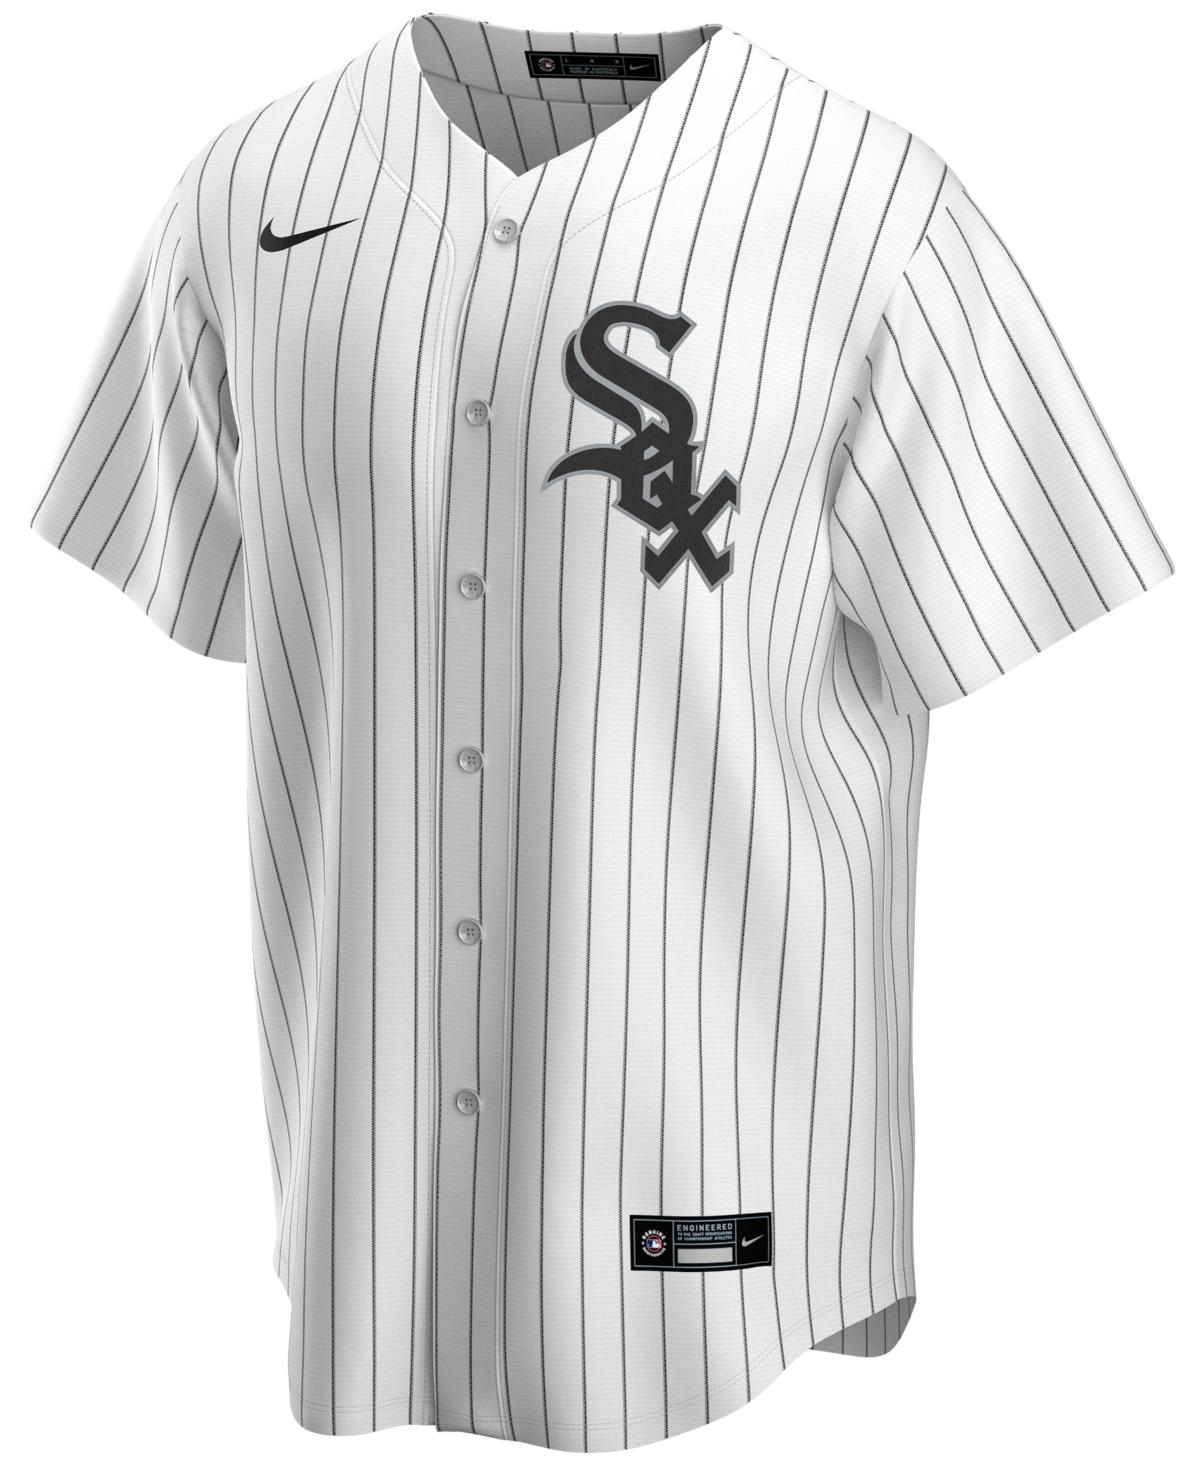 Men's Nike Bo Jackson Black Chicago White Sox Alternate Cooperstown  Collection Replica Player Jersey